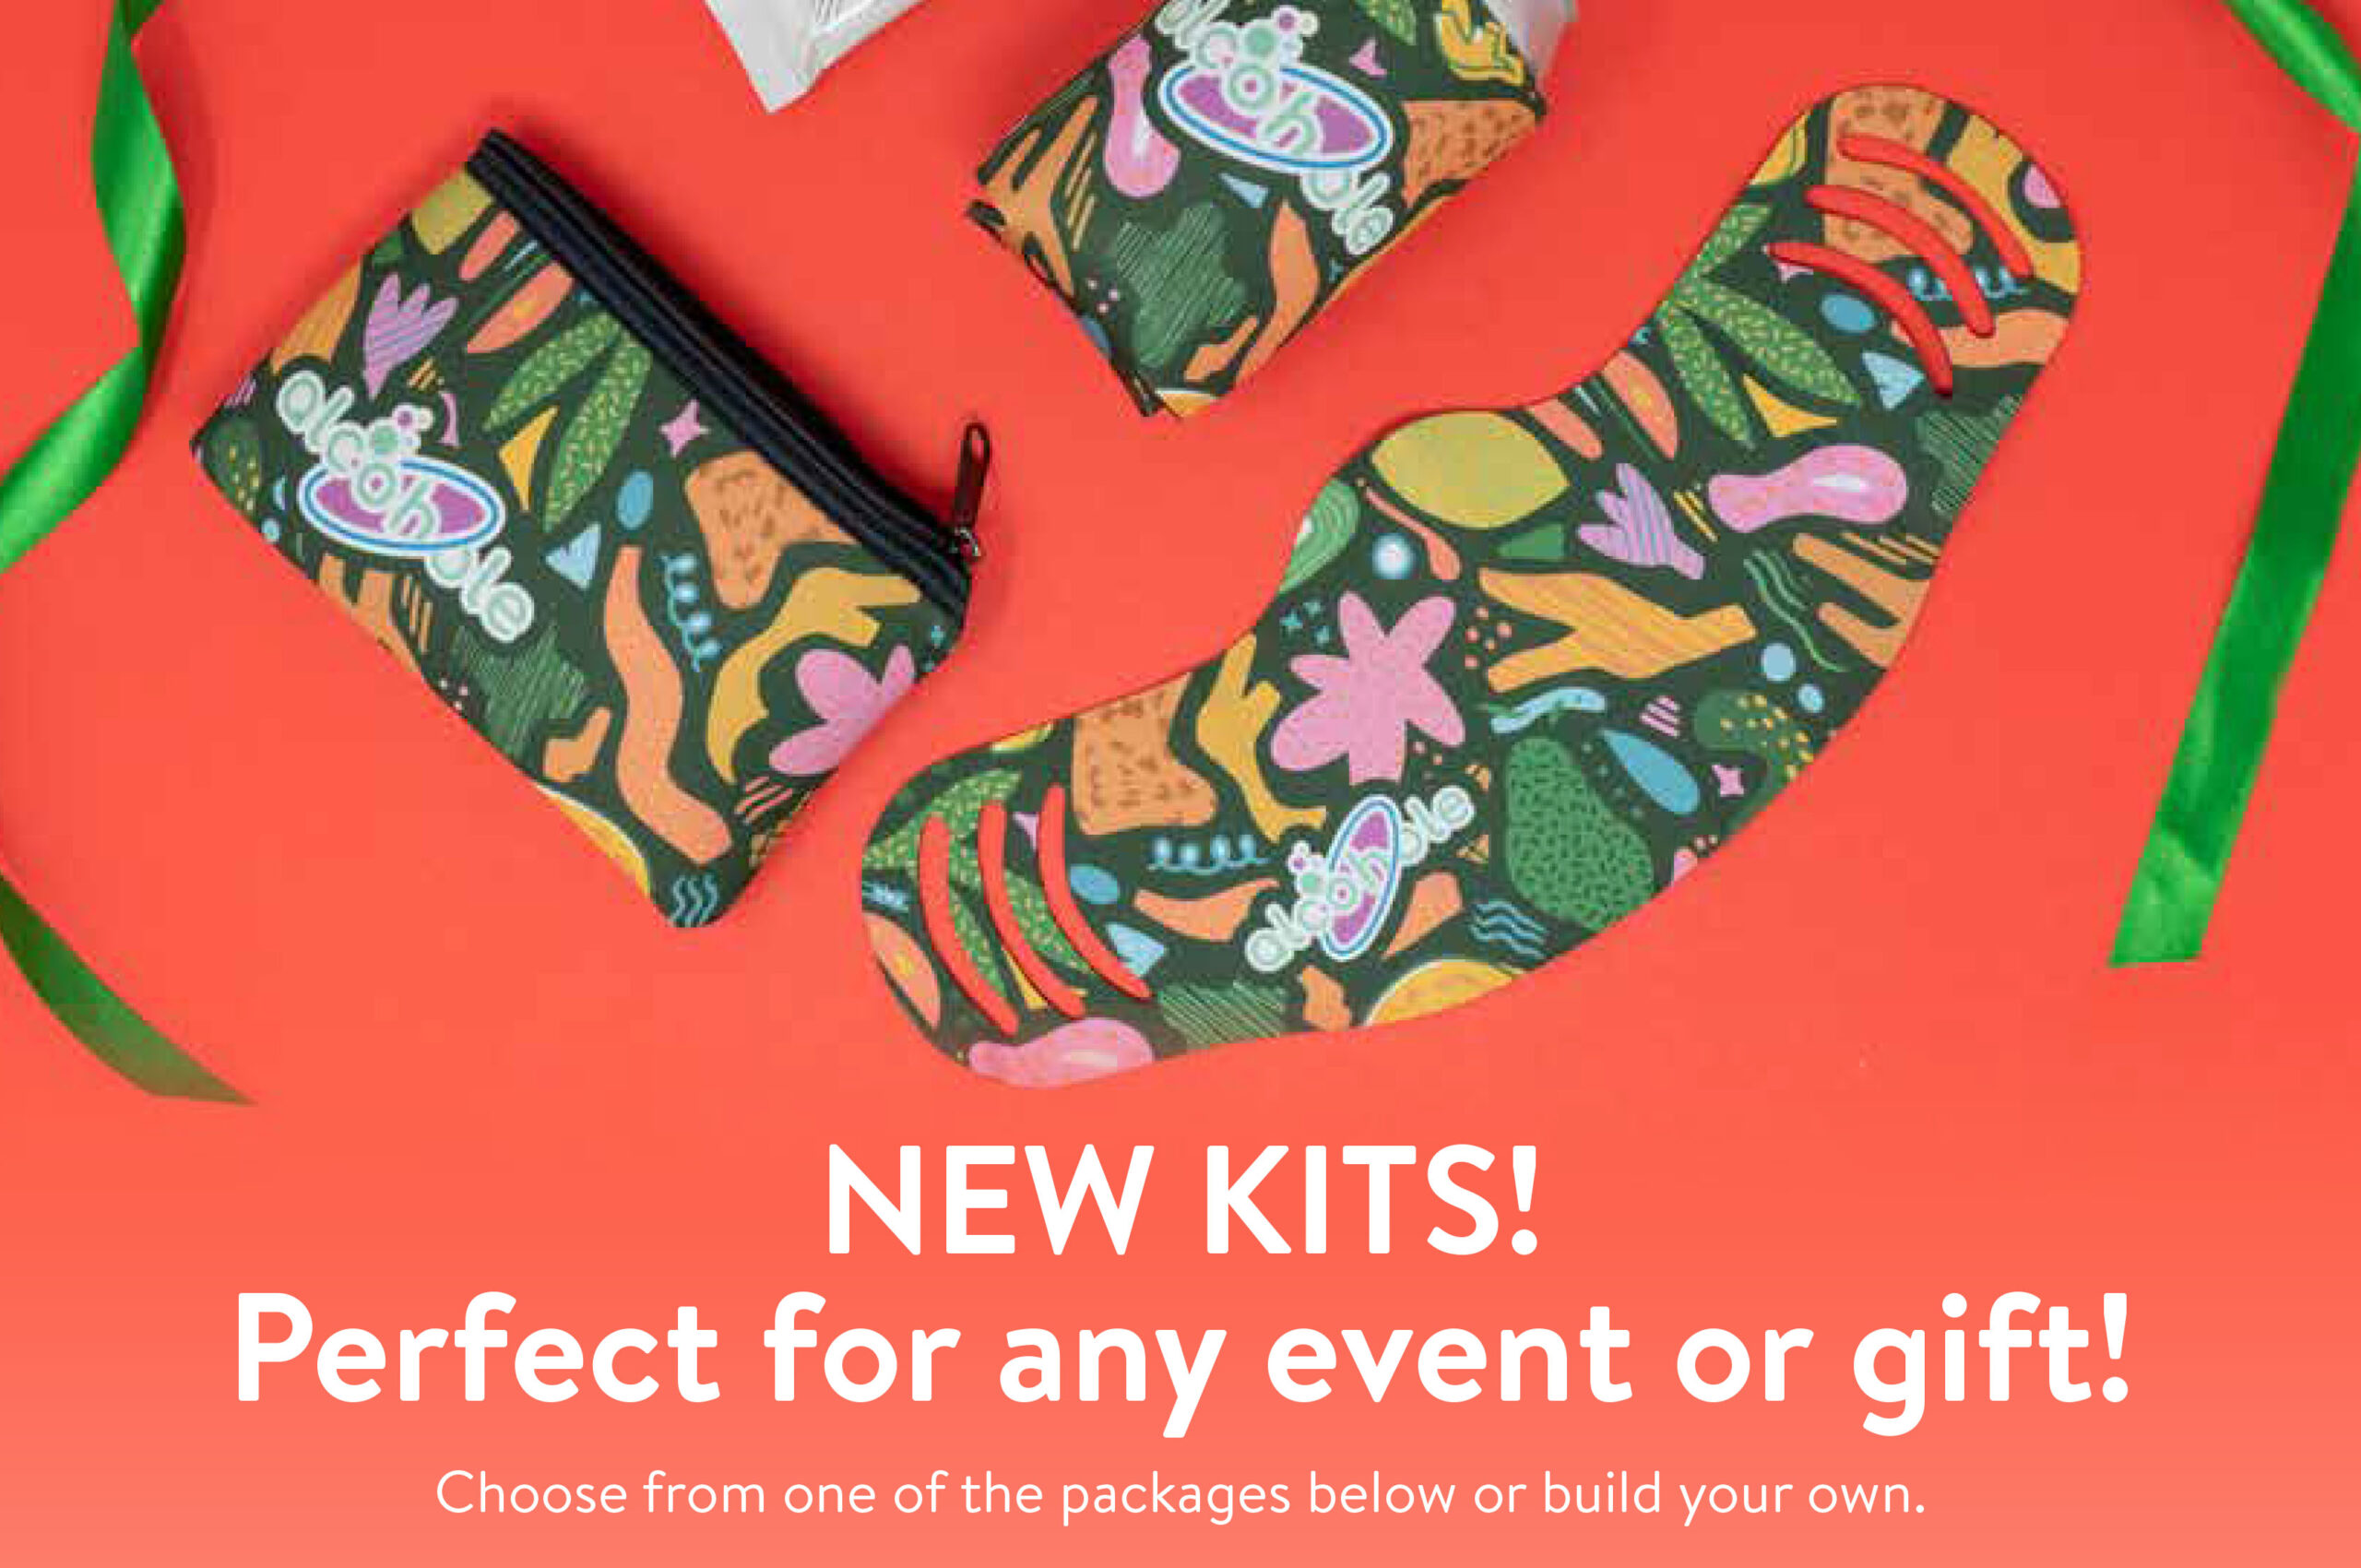 New PPE Kits! Perfect for any event or gift!